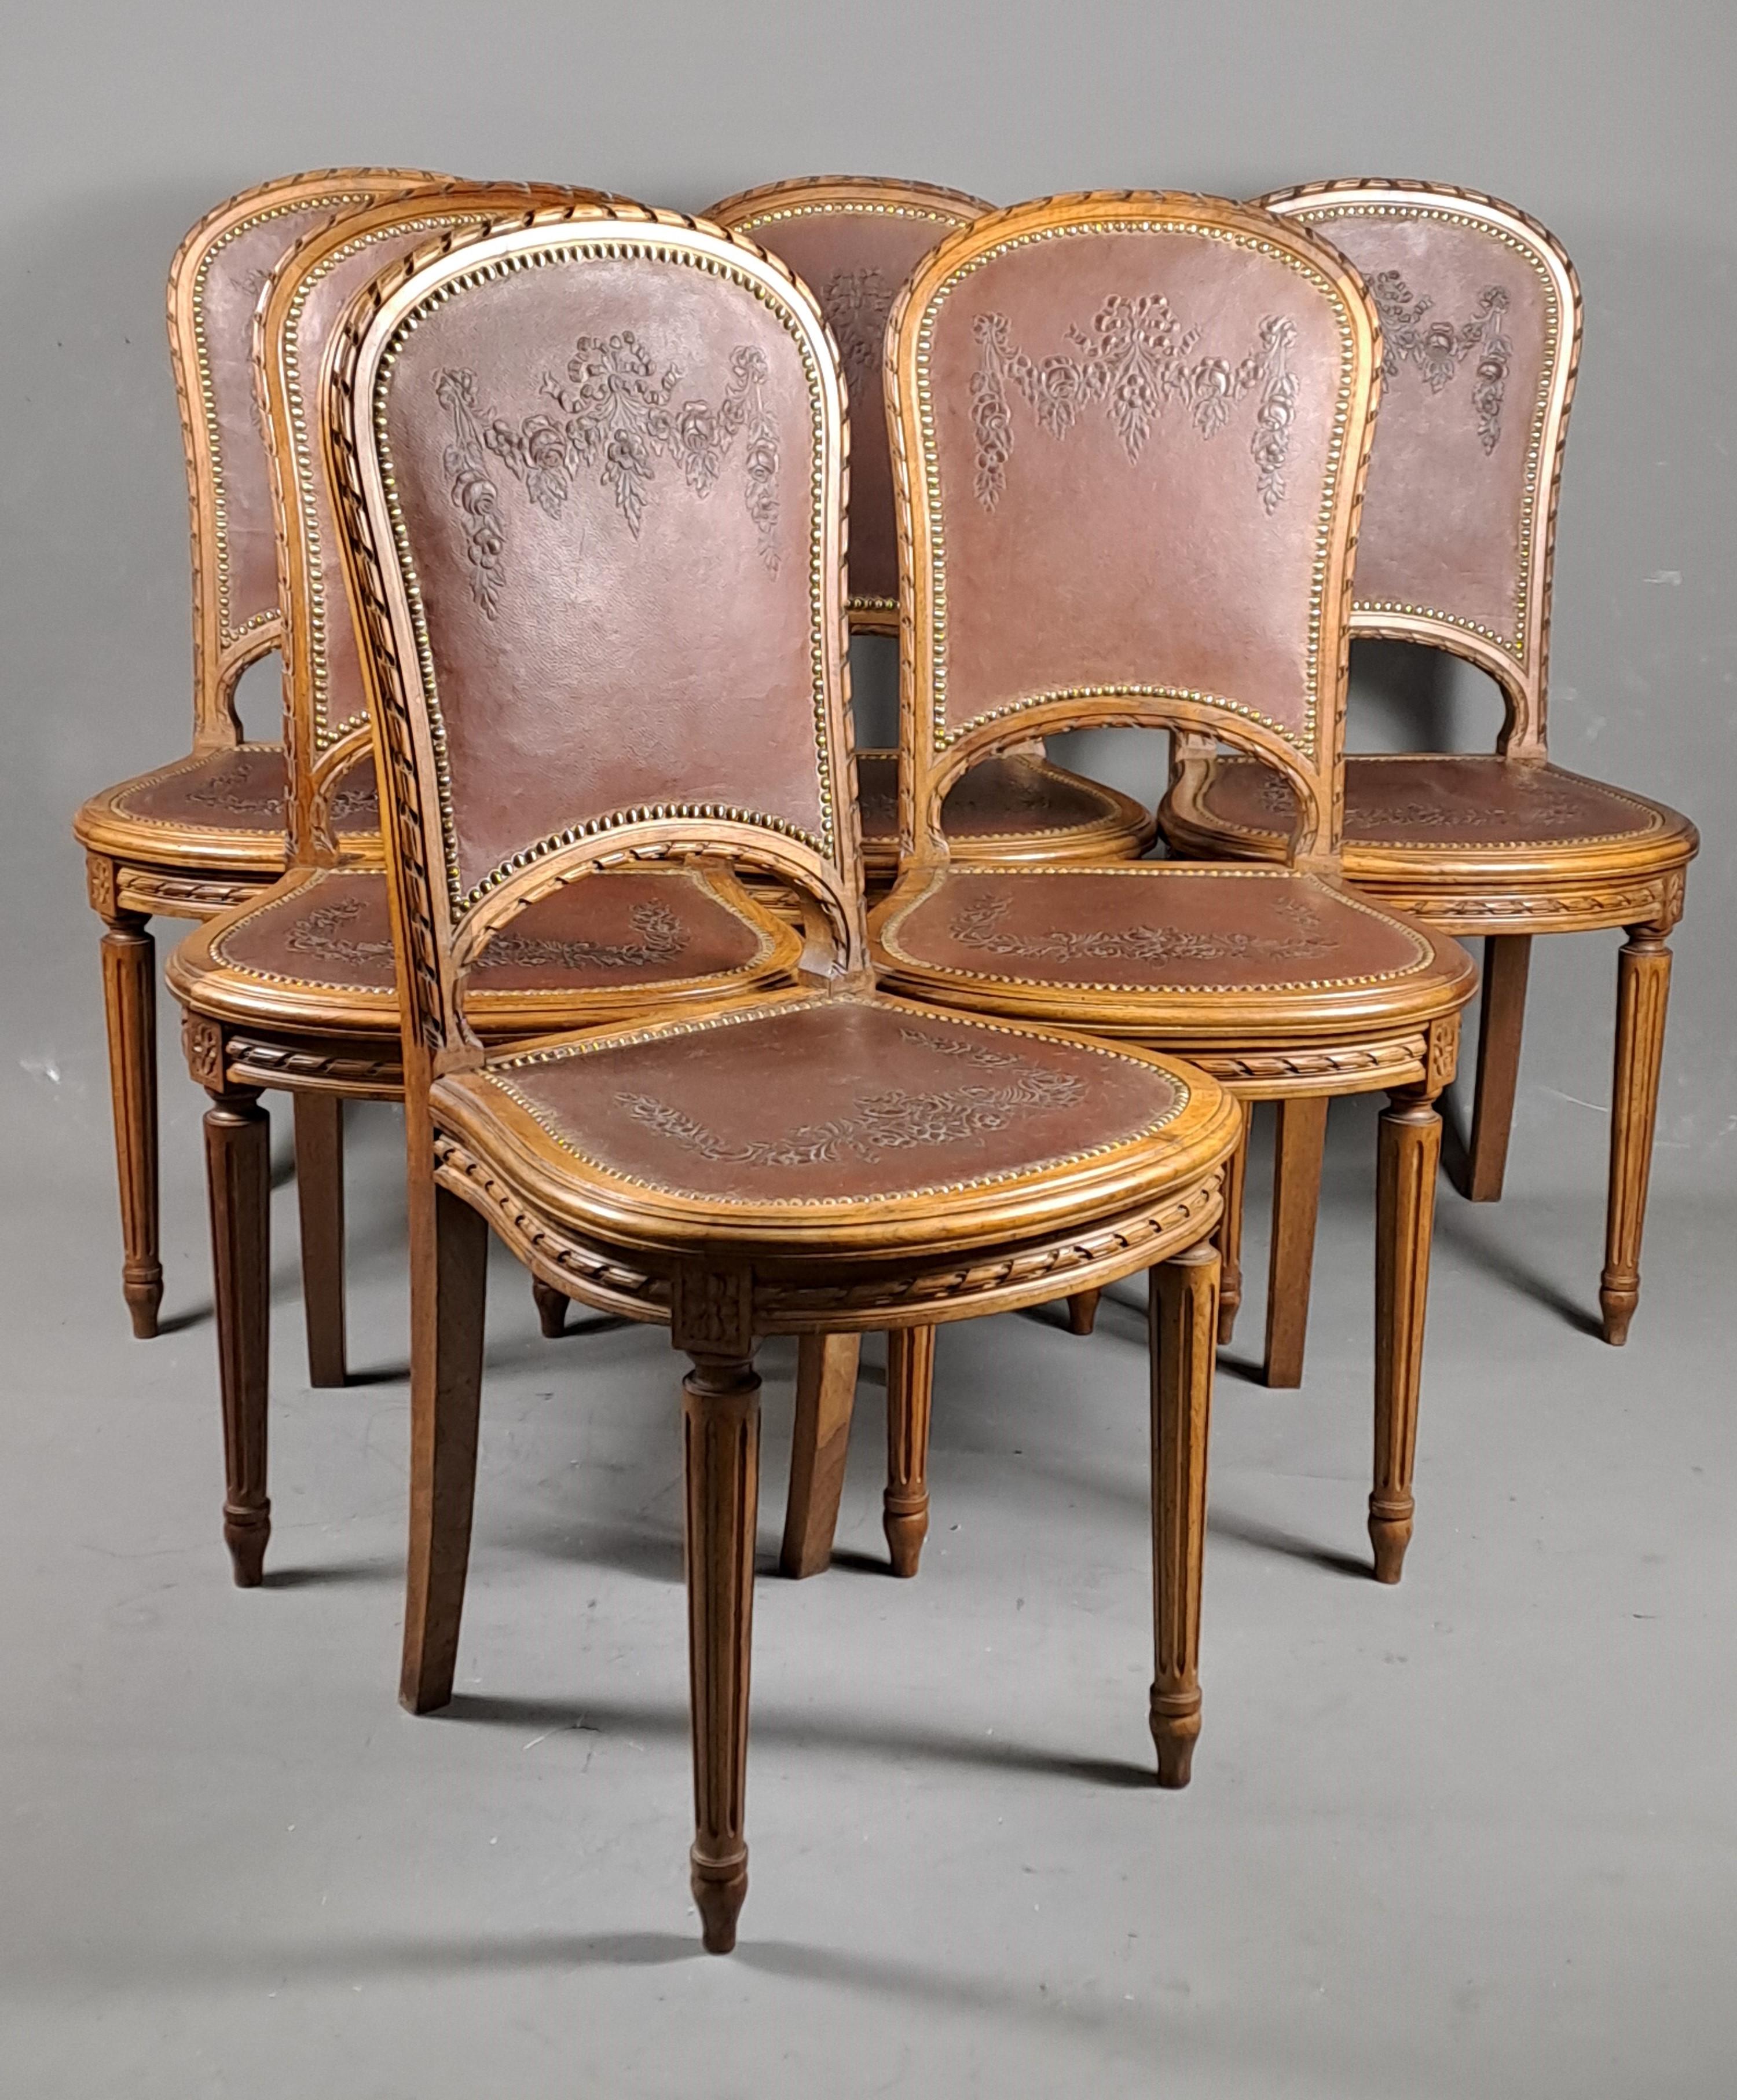 French Series Of 6 Louis XVI Style Chairs In Solid Walnut And Embossed Cordoba Leather 